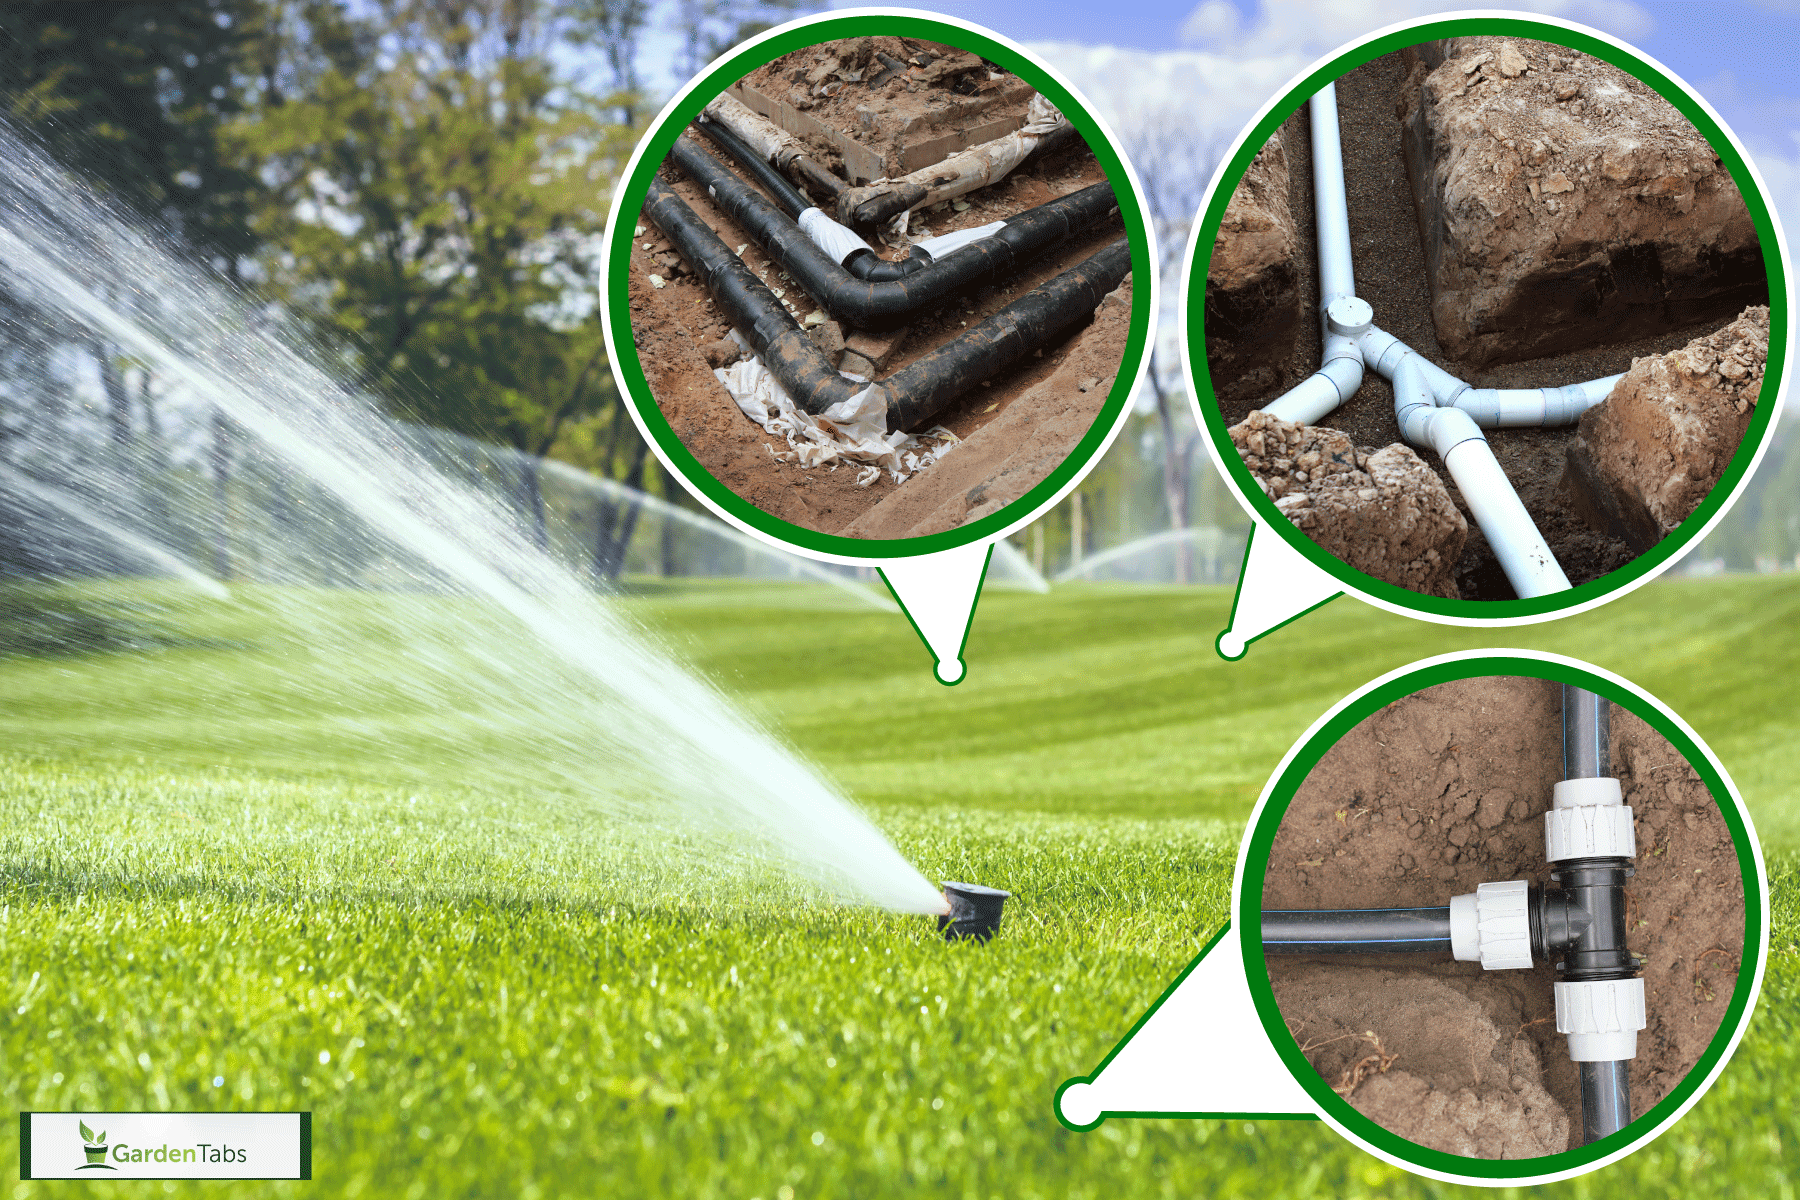 A golf course sprinkler system turned on, How To Map Out An Existing Irrigation System